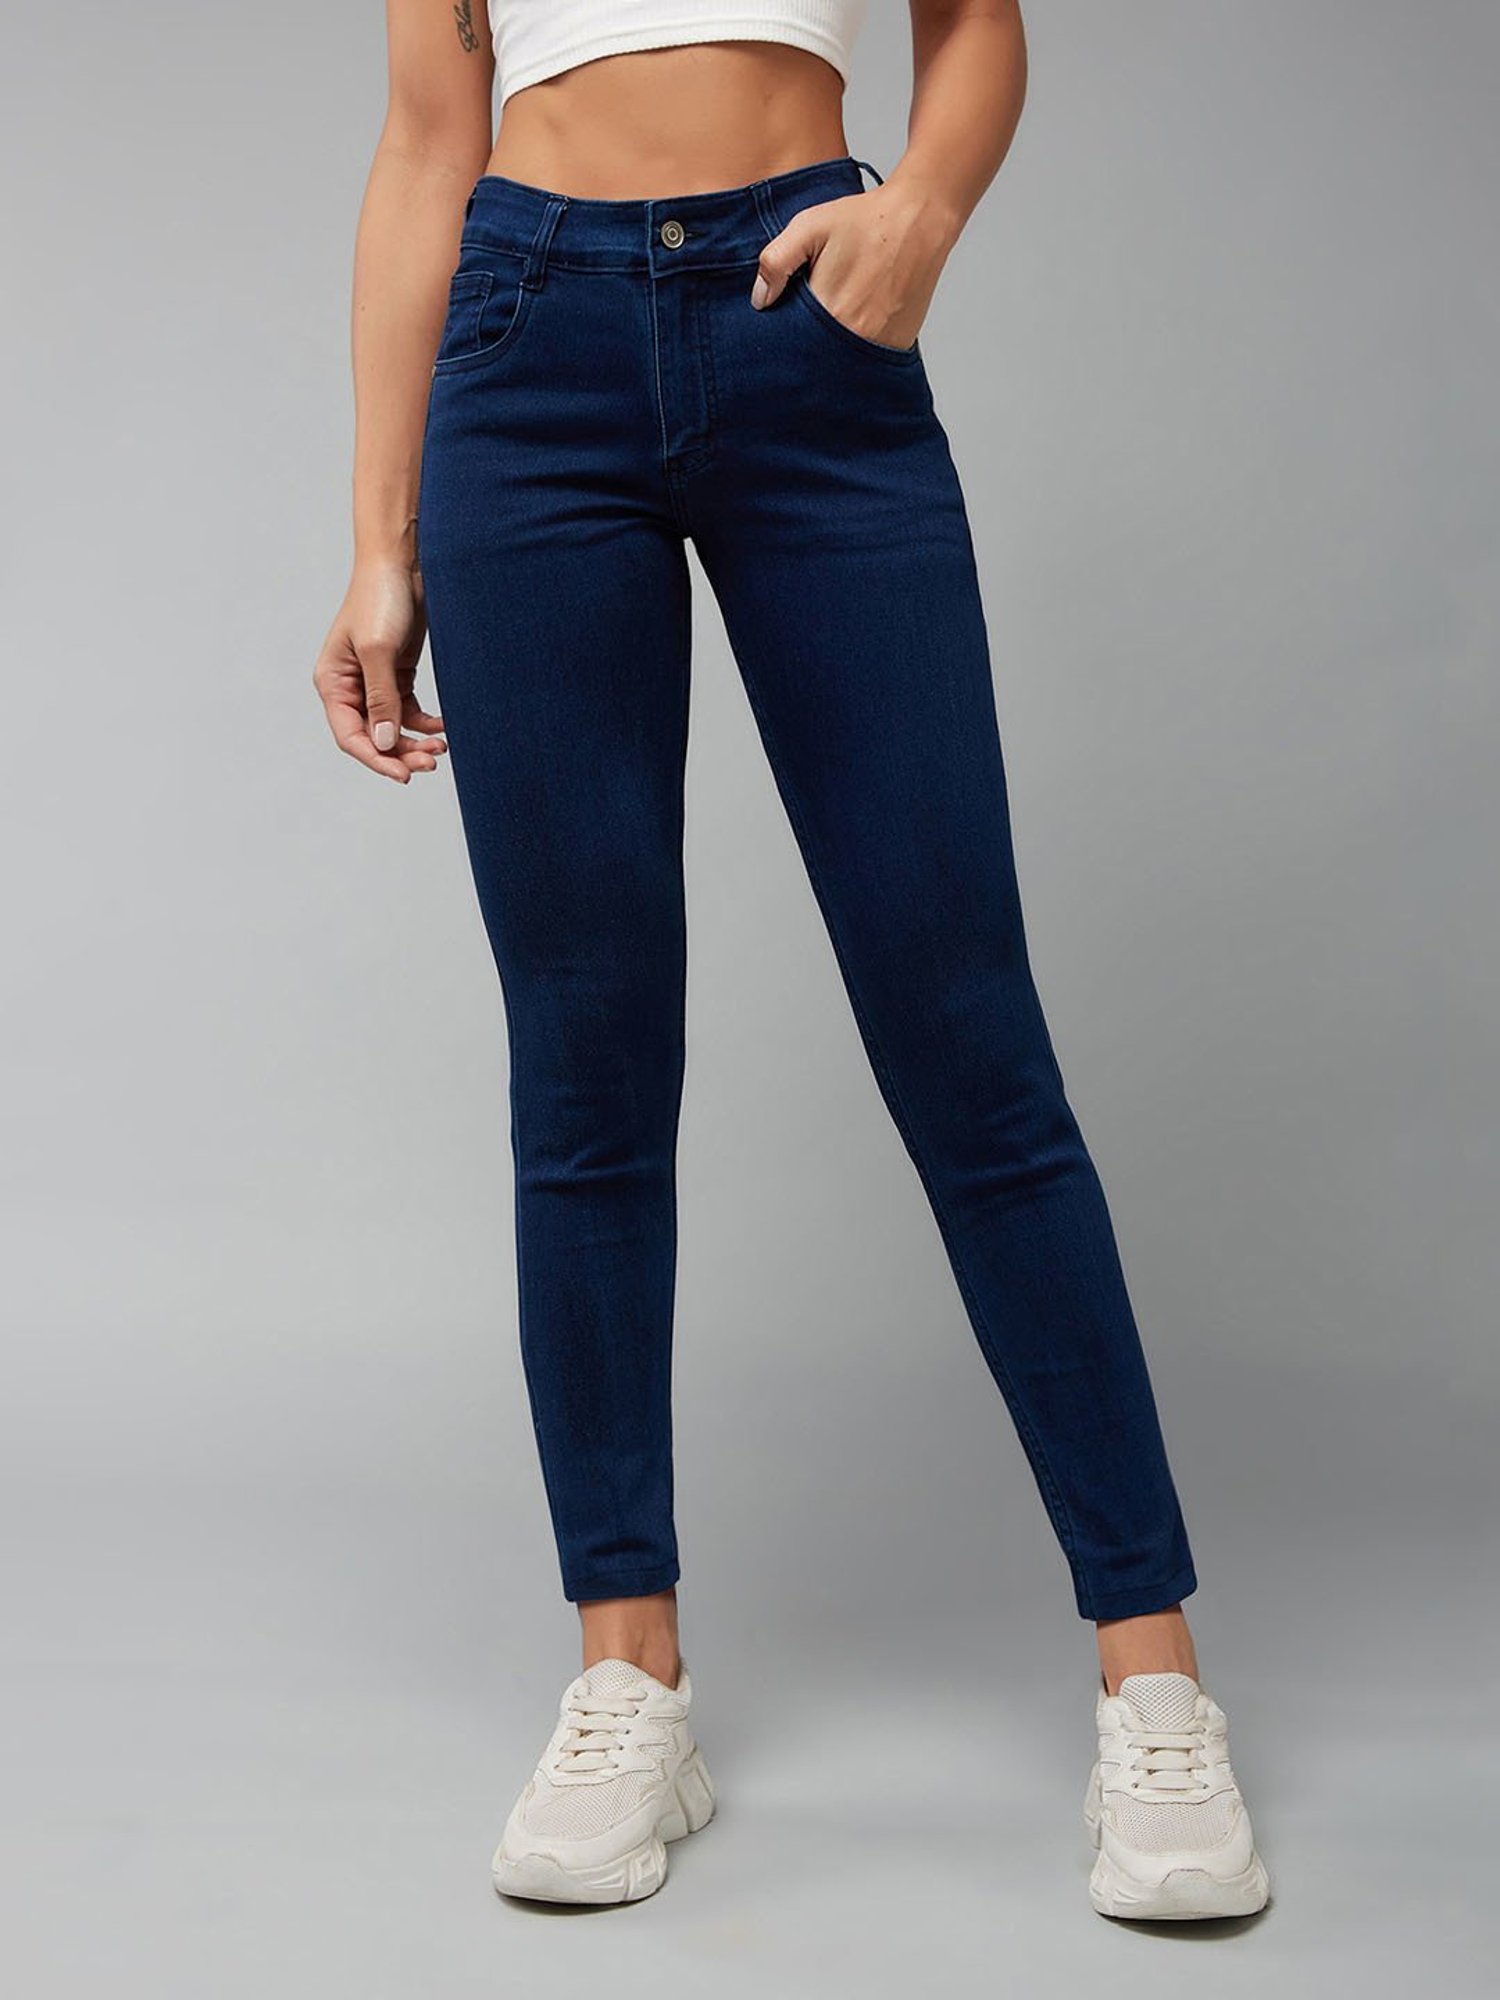 High Waisted Jeans in Dark Blue